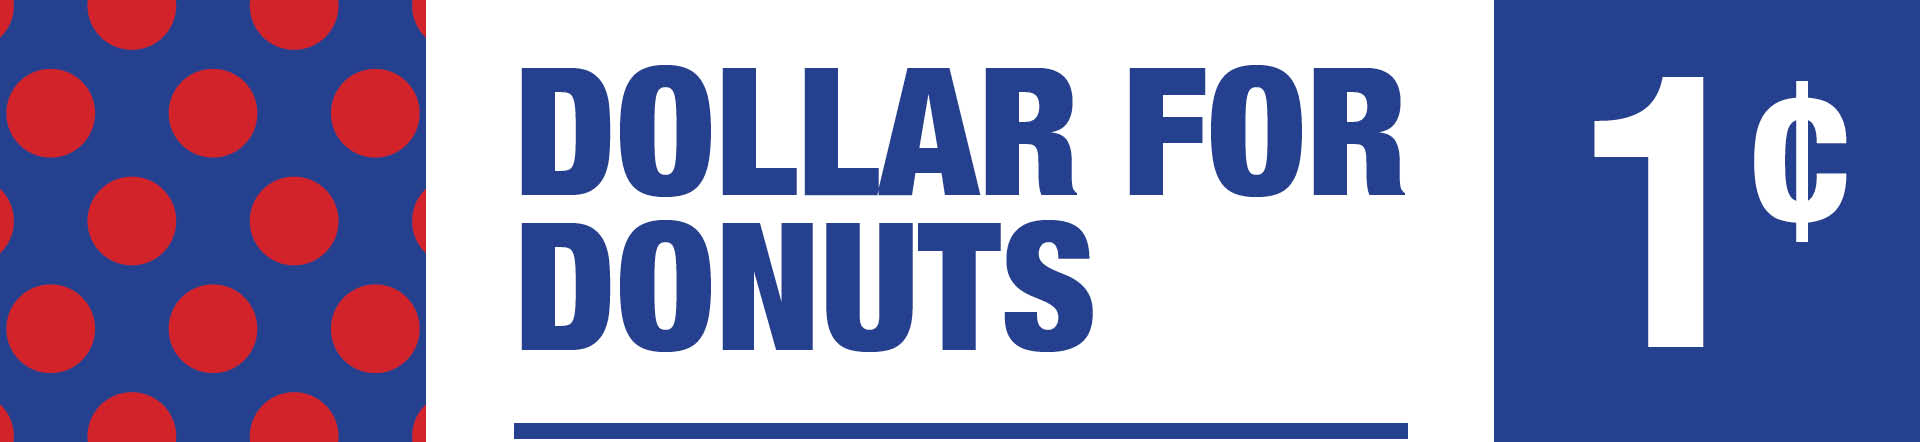 Dollar for Donuts